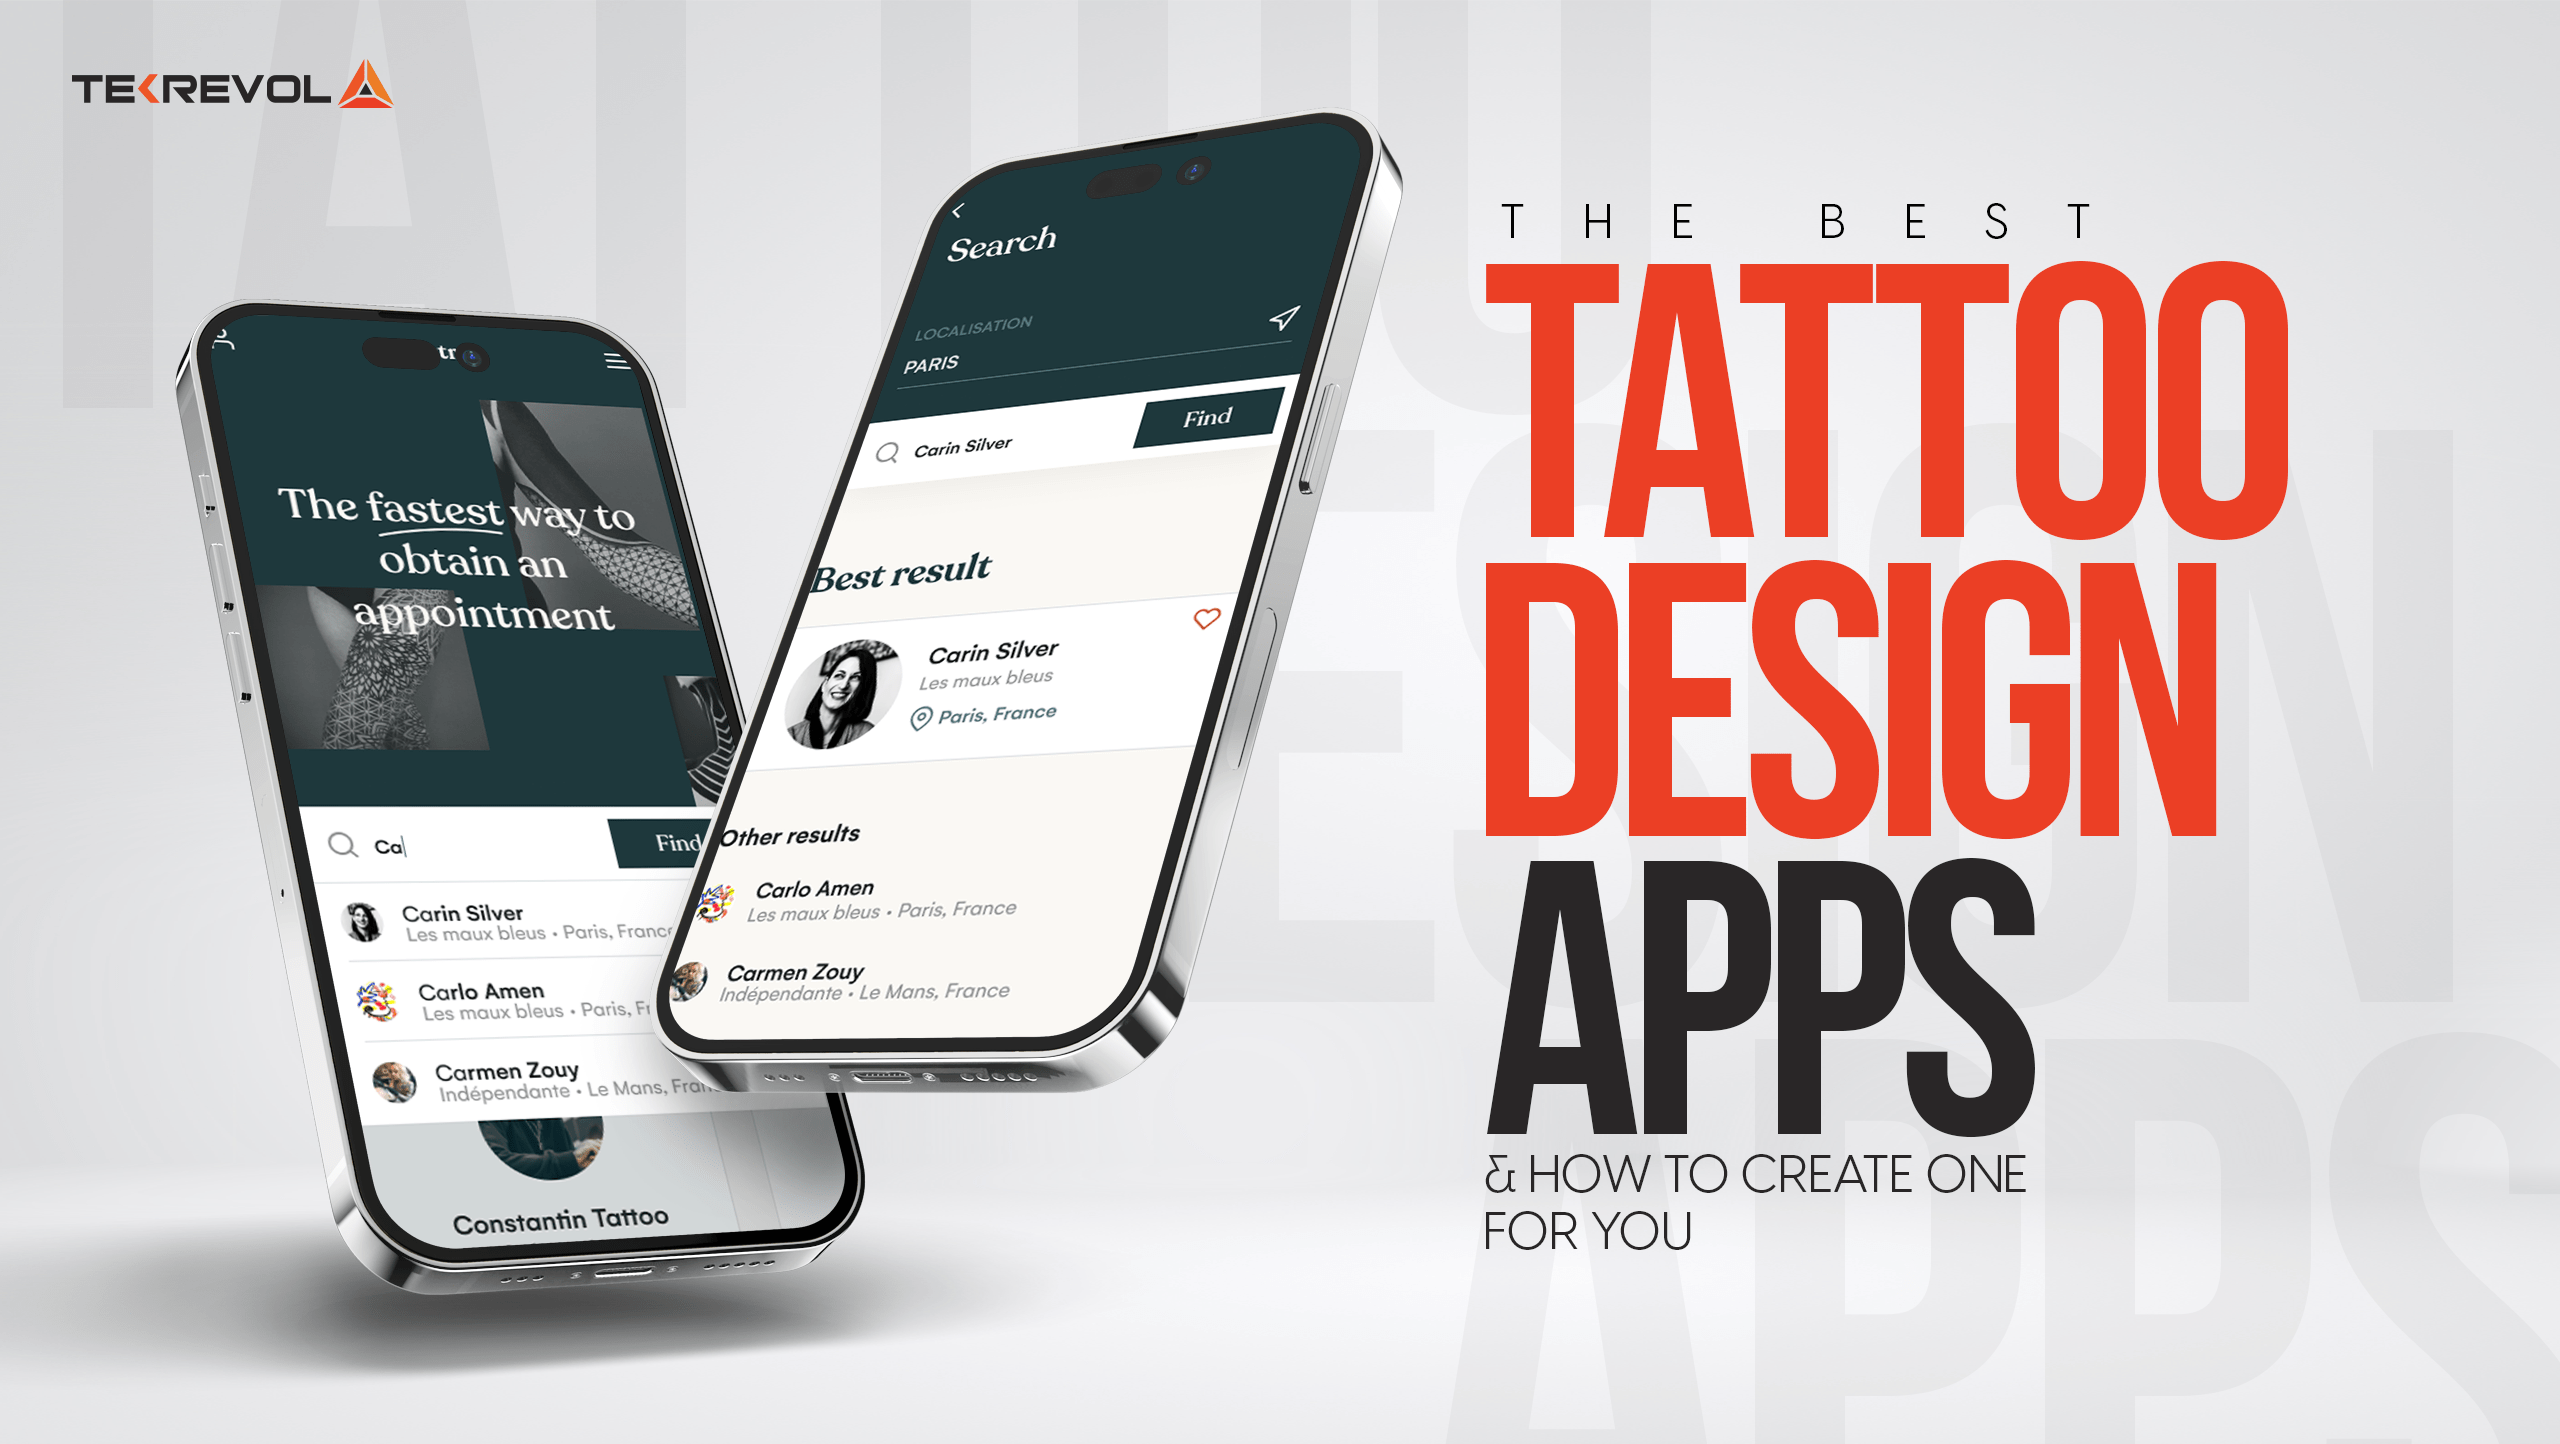 The Best Tattoo Design Apps and How to Create One For You